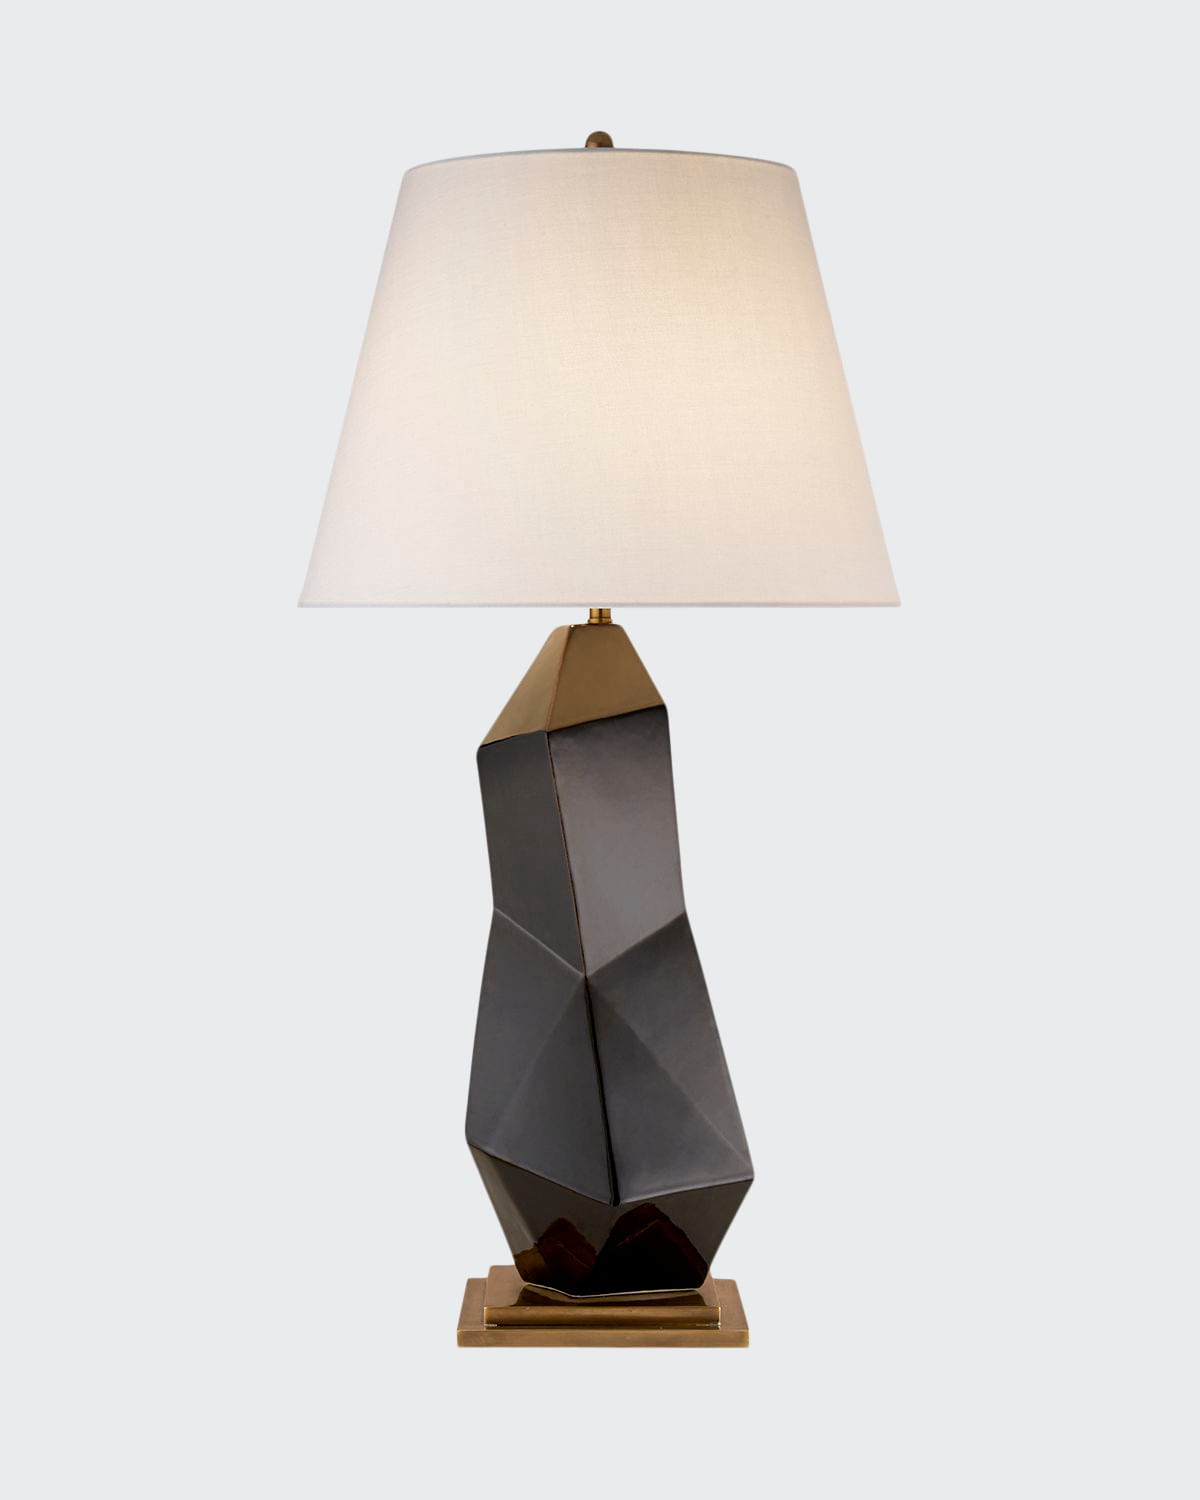 Kelly Wearstler For Visual Comfort Signature Bayliss Table Lamp In Black